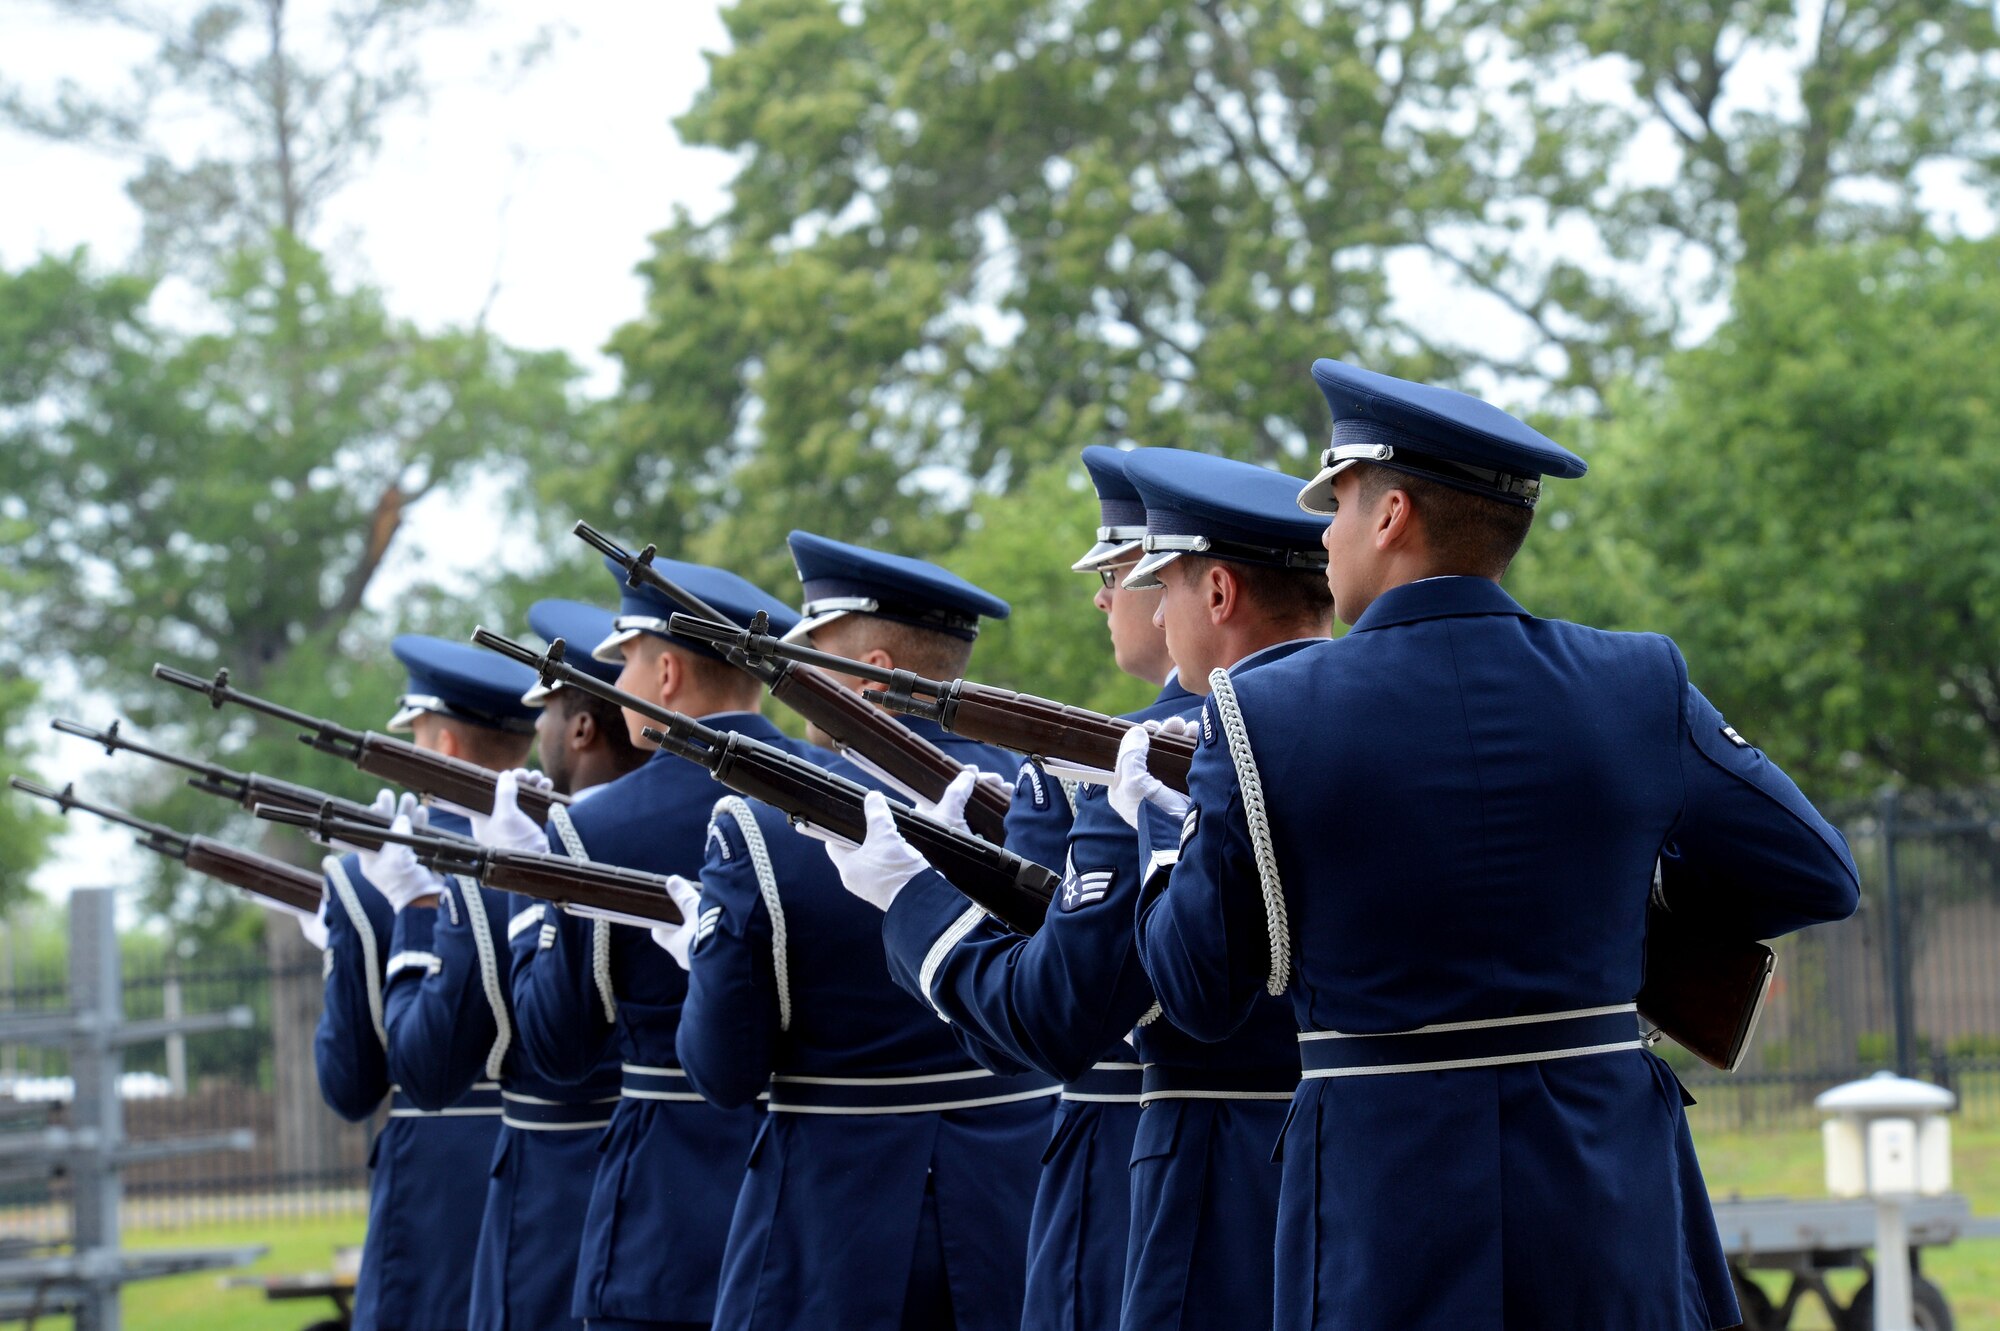 The Shaw honor guard performs a 21-gun salute at a memorial ceremony at Shaw Air Force Base, S.C., April 30, 2013.  The memorial ceremony commemorated the life and accomplishments of Capt. James Steel, 77th Fighter Squadron pilot, who died in an F-16 Fighting Falcon aircraft accident, while deployed to Afghanistan.  (U.S. Air Force photo by Airman 1st Class Nicole Sikorski/Released)